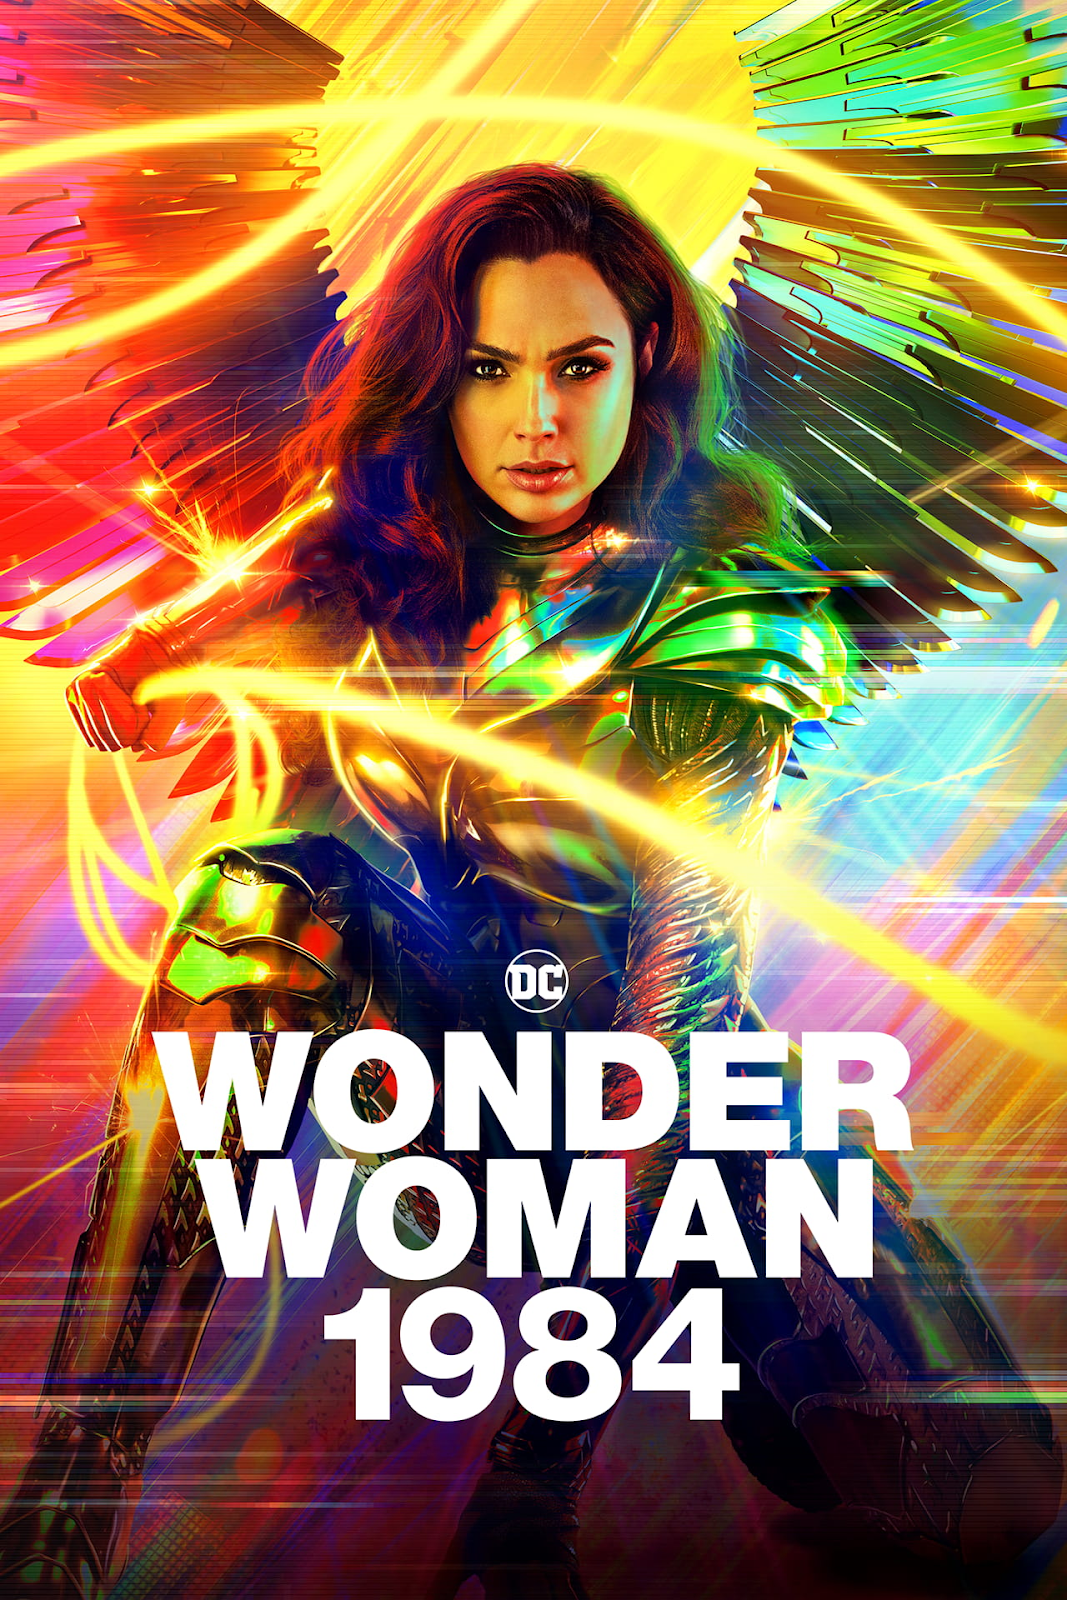 Wonder Woman 1984 trailer, example of movie poster with contrast